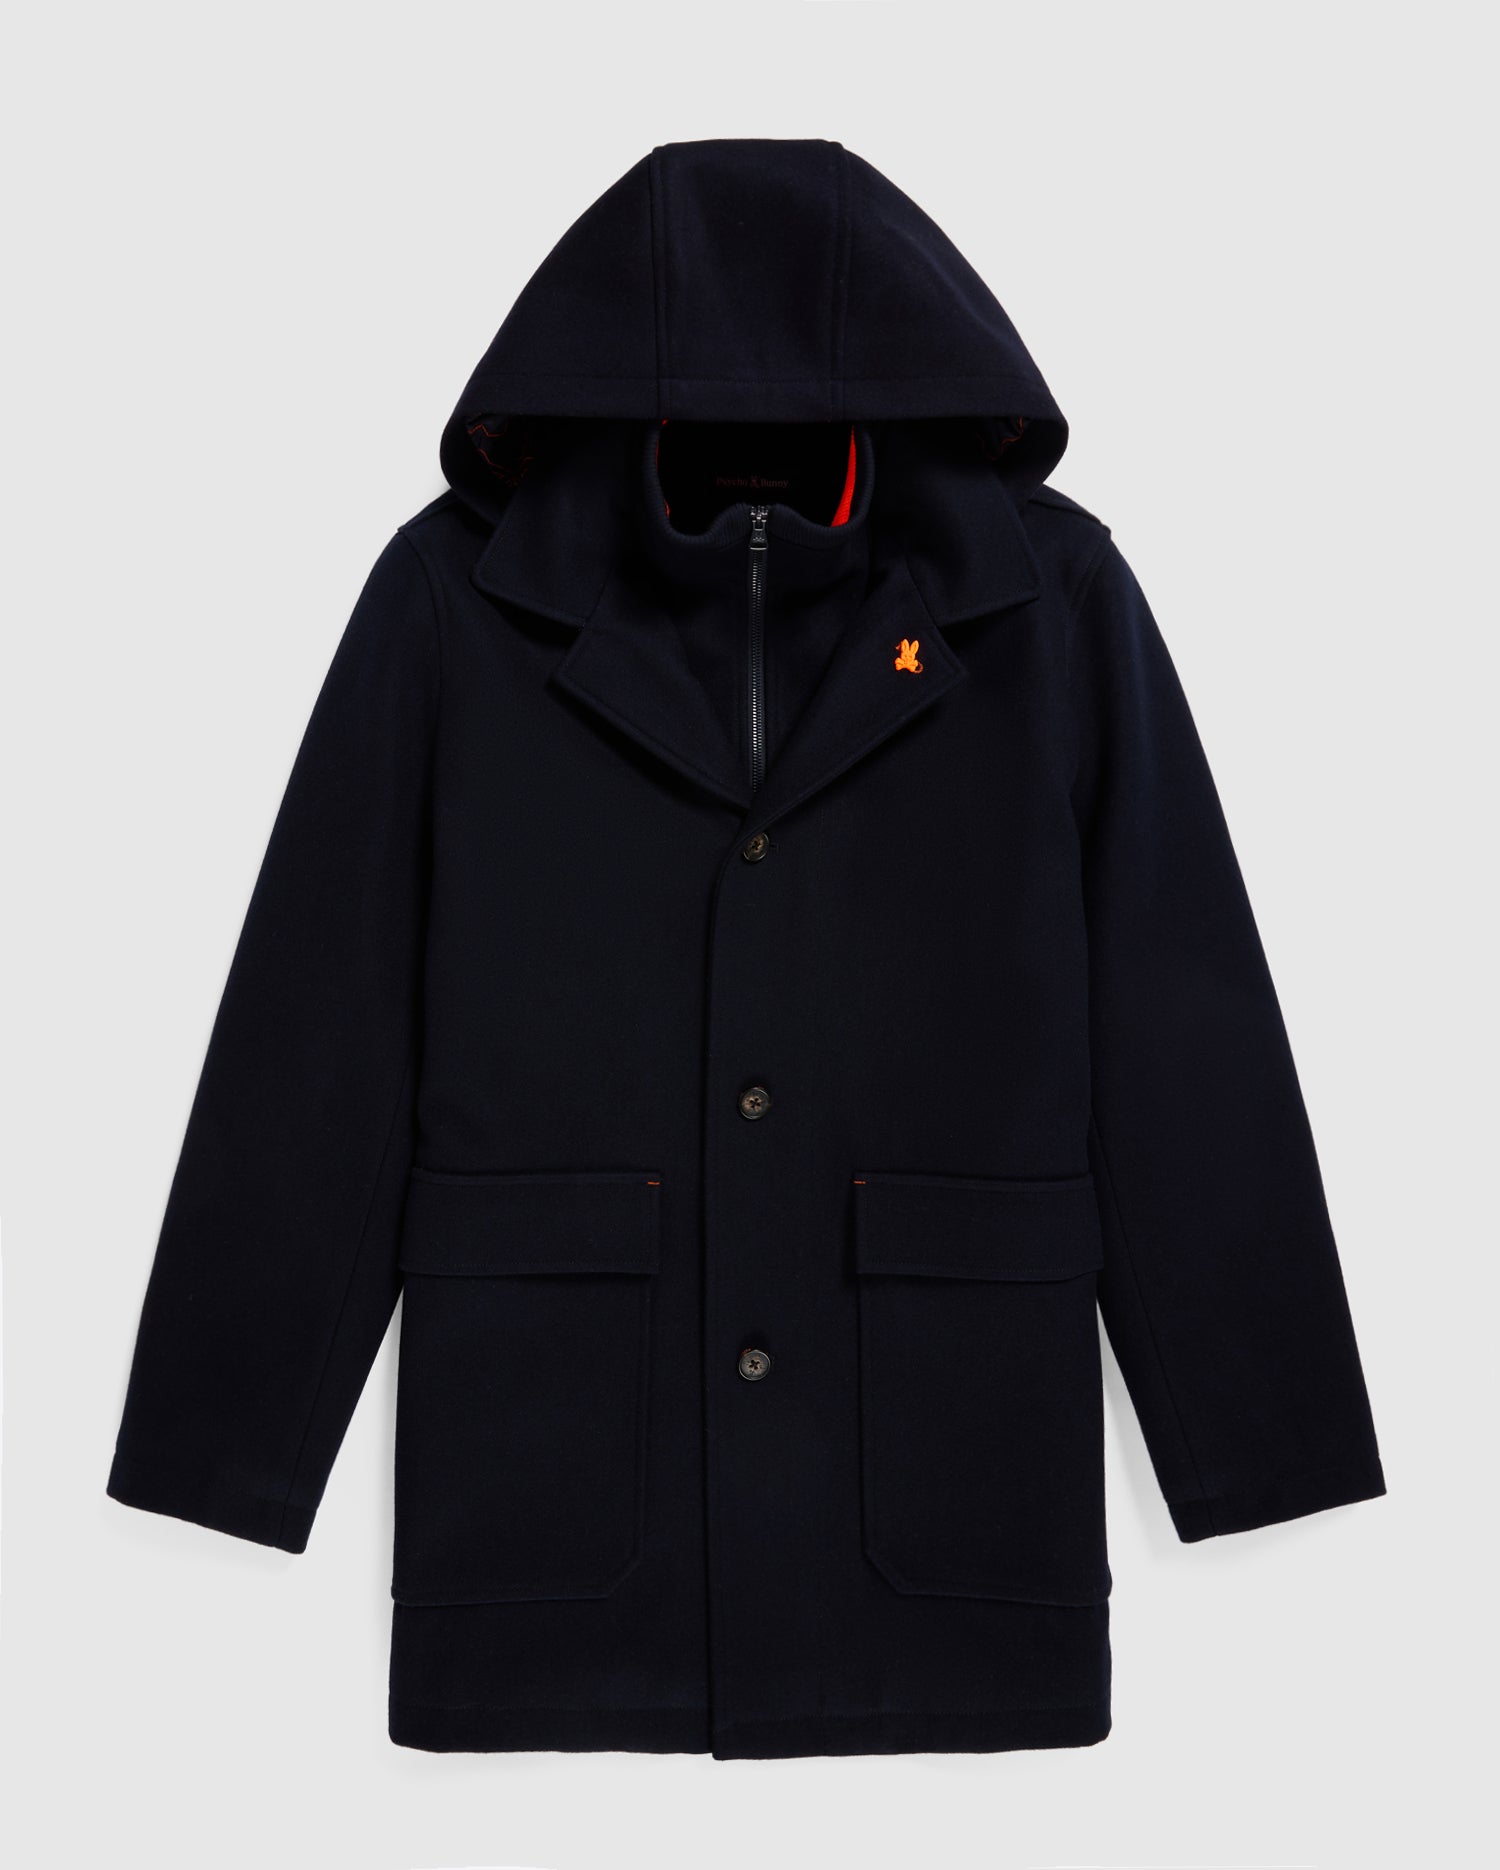 MENS CHESTER WOOL BLEND COAT WITH REMOVABLE HOOD | PSYCHO BUNNY